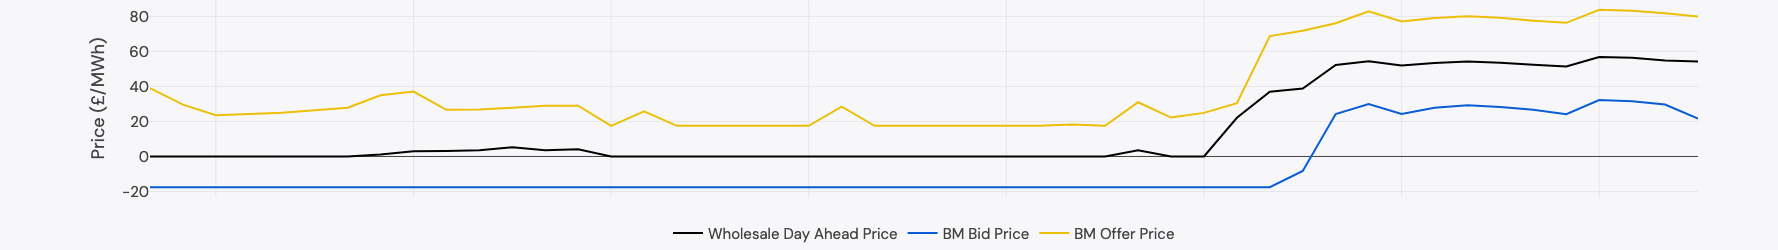 Prices across the BM and wholesale markets on the day shown above.